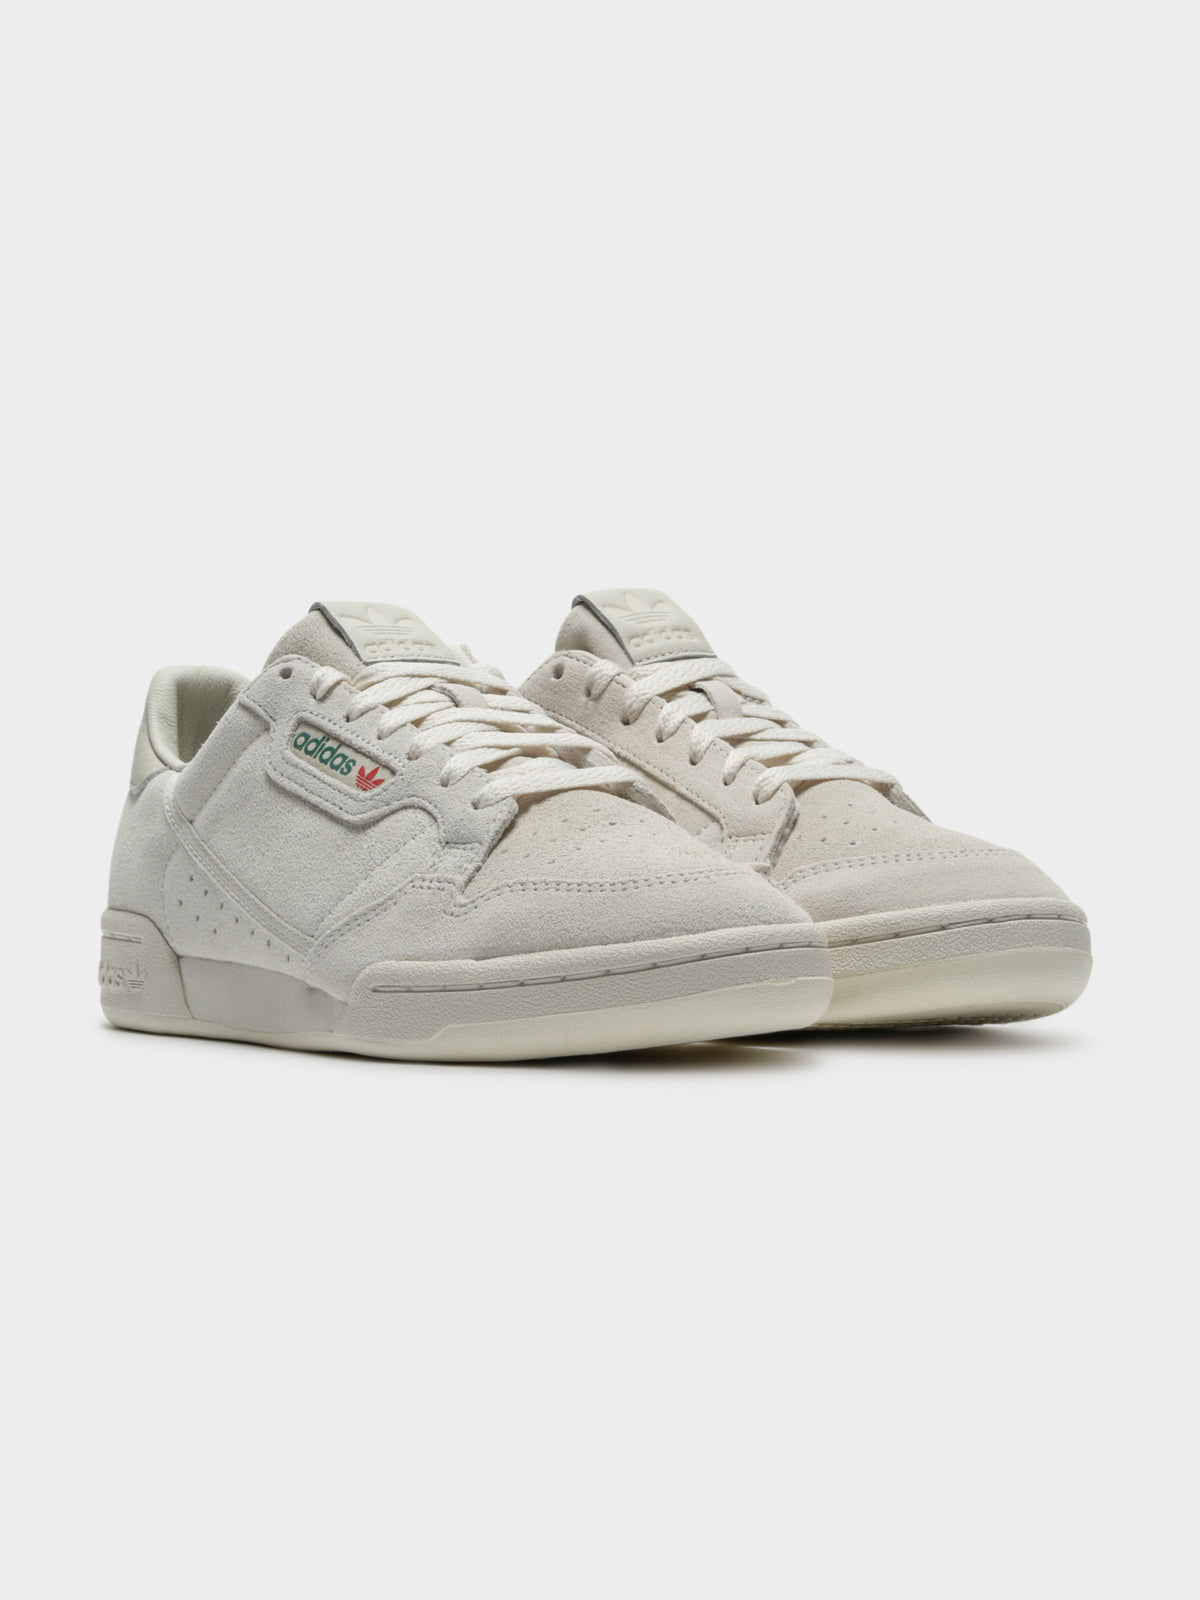 Unisex Continental 80 Sneakers in Raw White &amp; Off-White